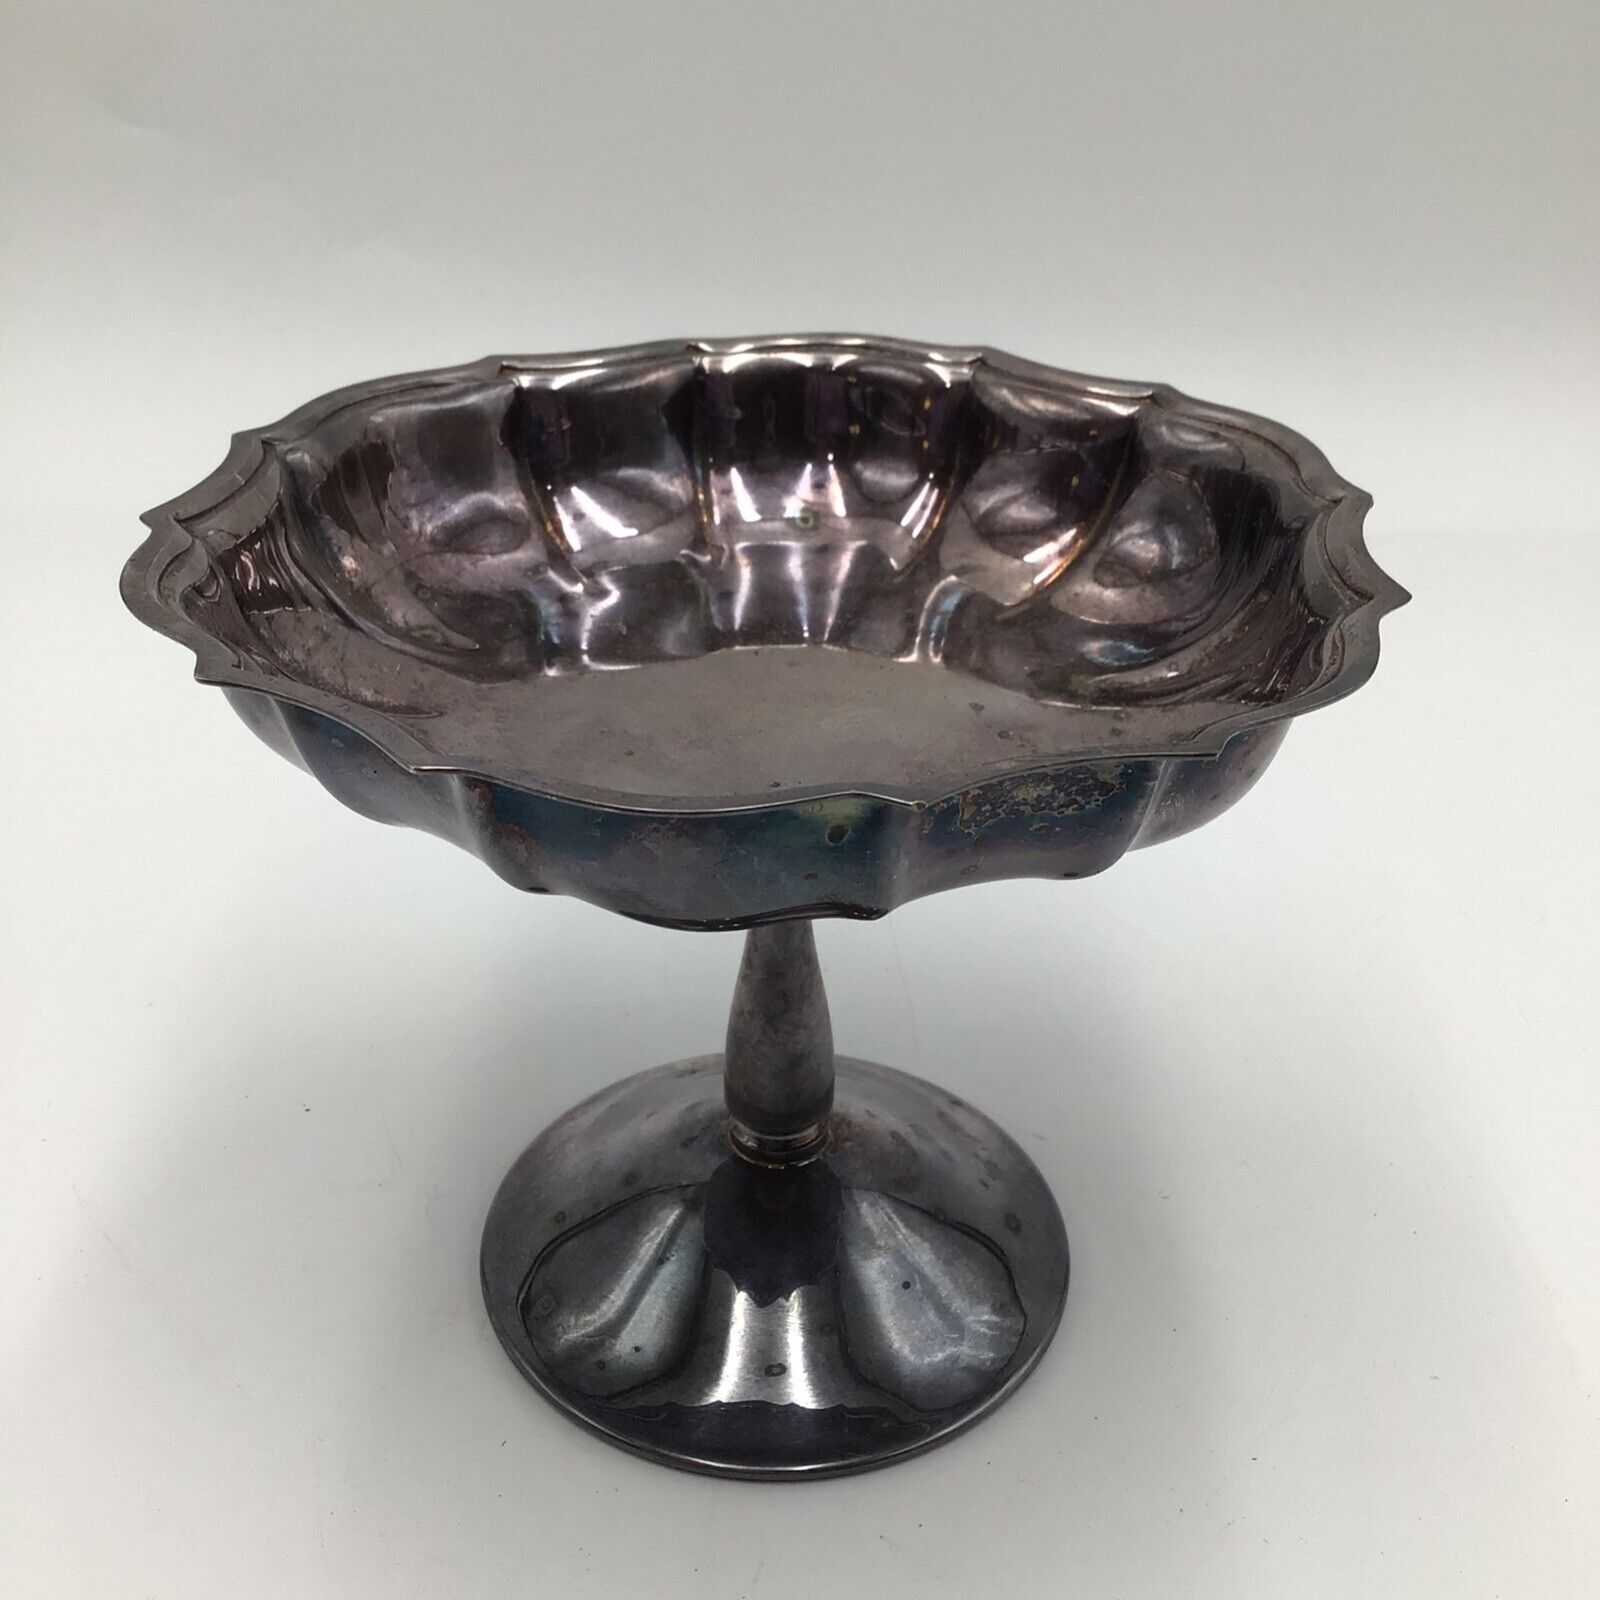 Chippendale International Silver Company Compote Pedestal Candy Dish Tray